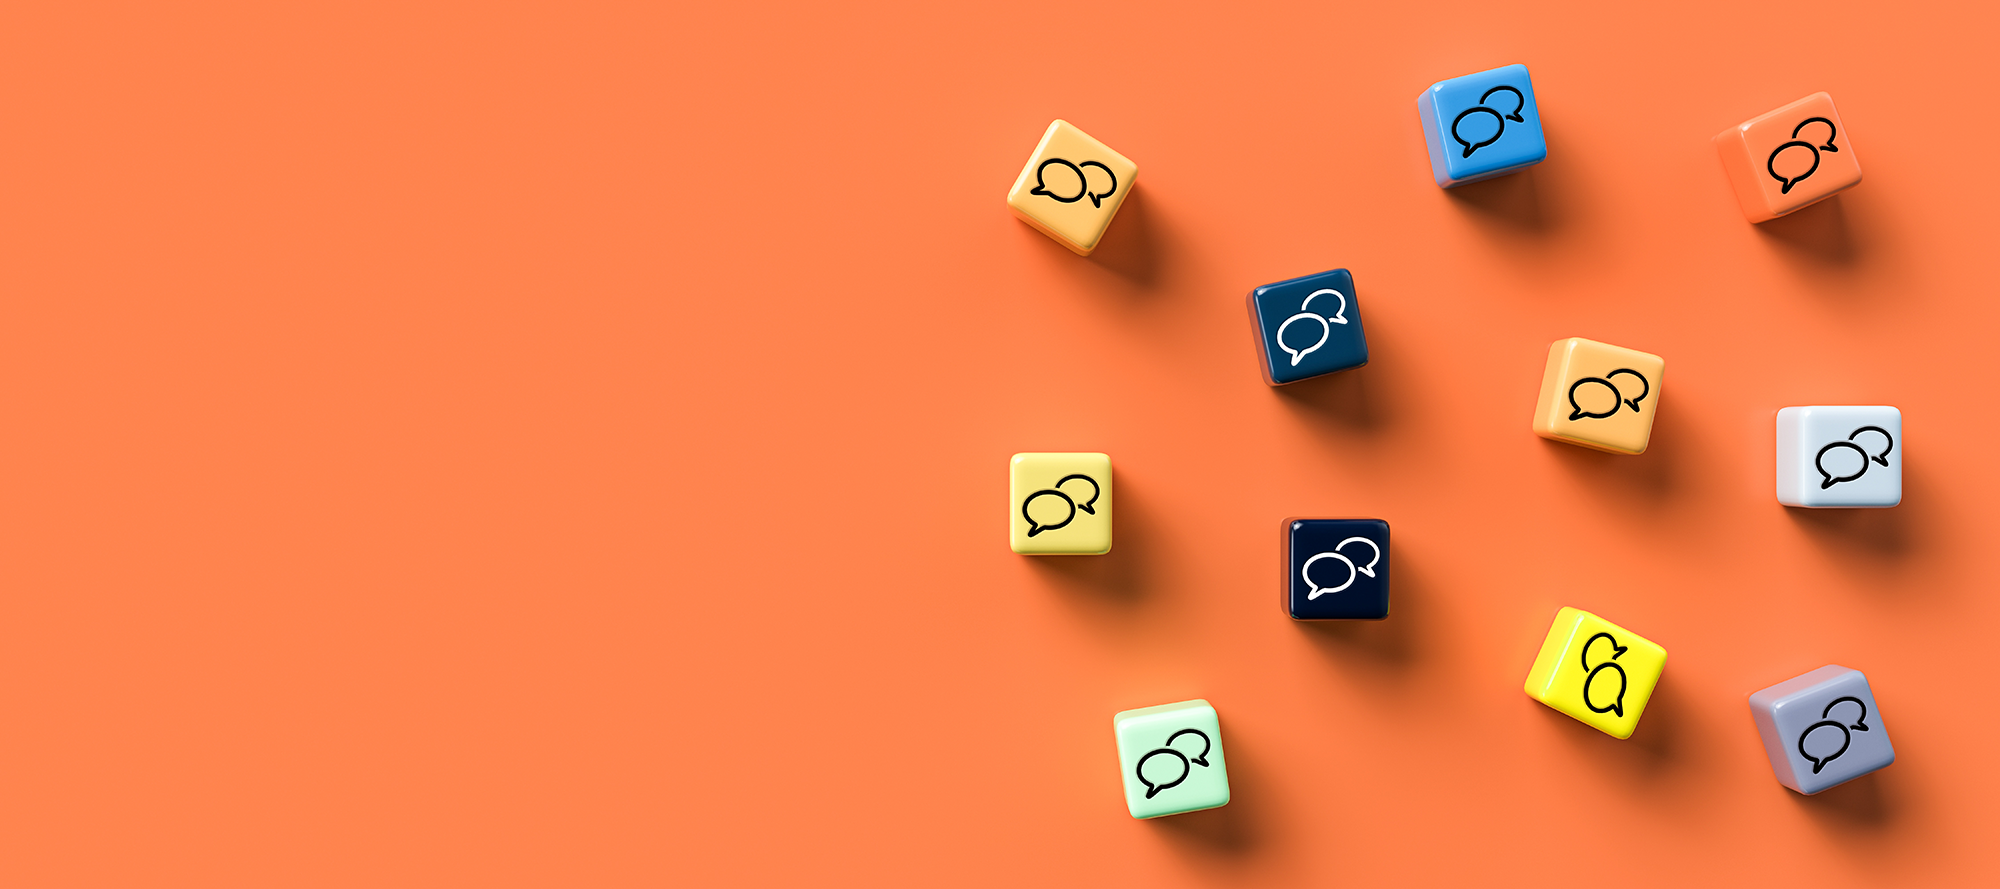 Colourful cubes with speech bubble icons